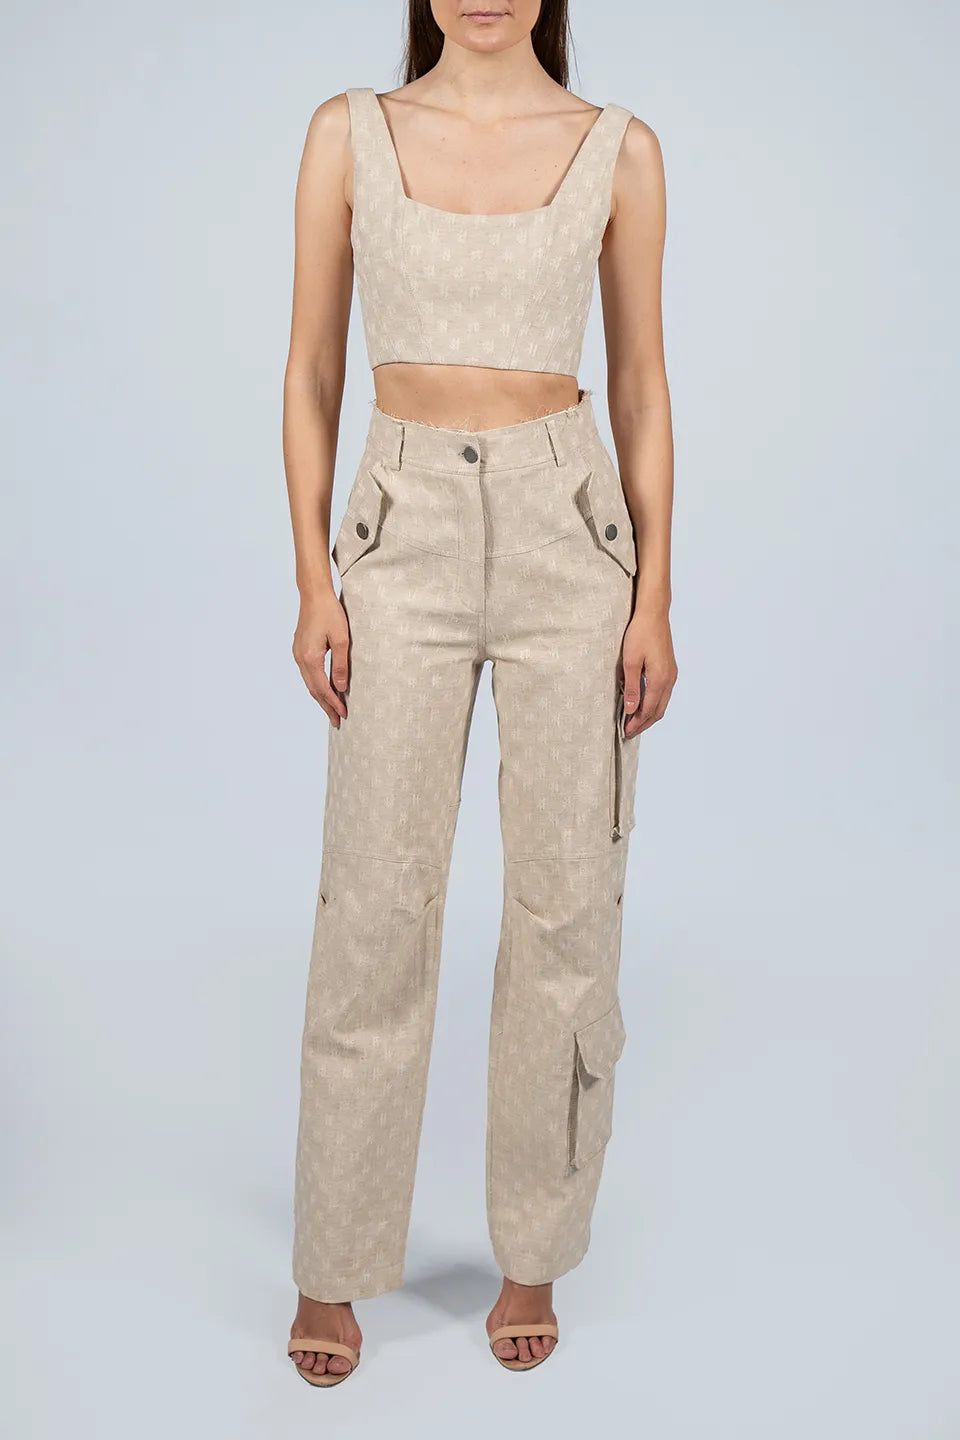 Shop online trendy Beige Women pants from Federica Tosi Fashion designer. Product gallery 1